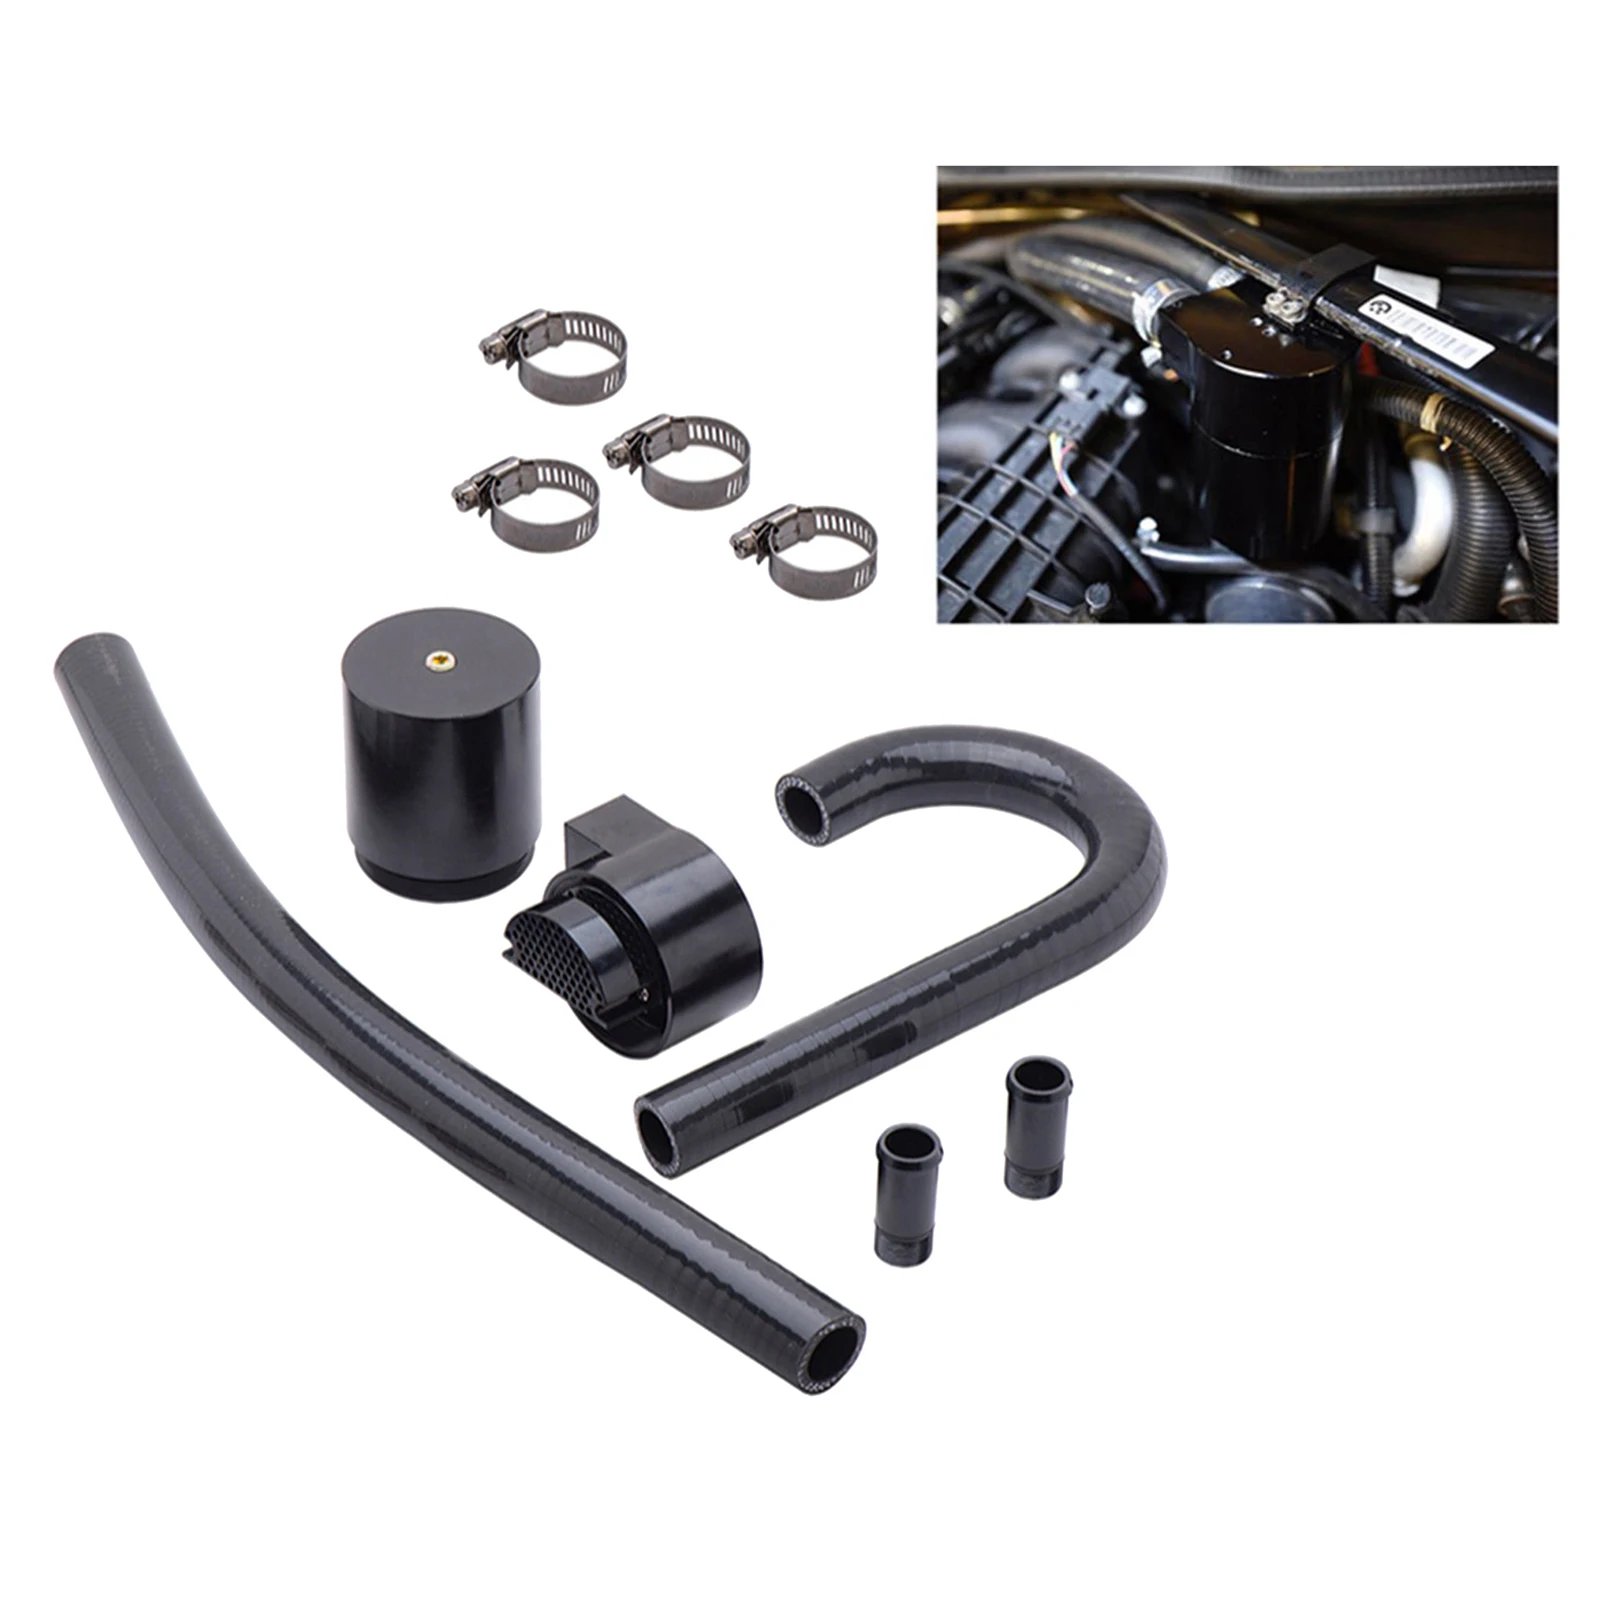 Oil Reservoir Catch Kit Replaces for  N54 2006-2010 Parts Accessories